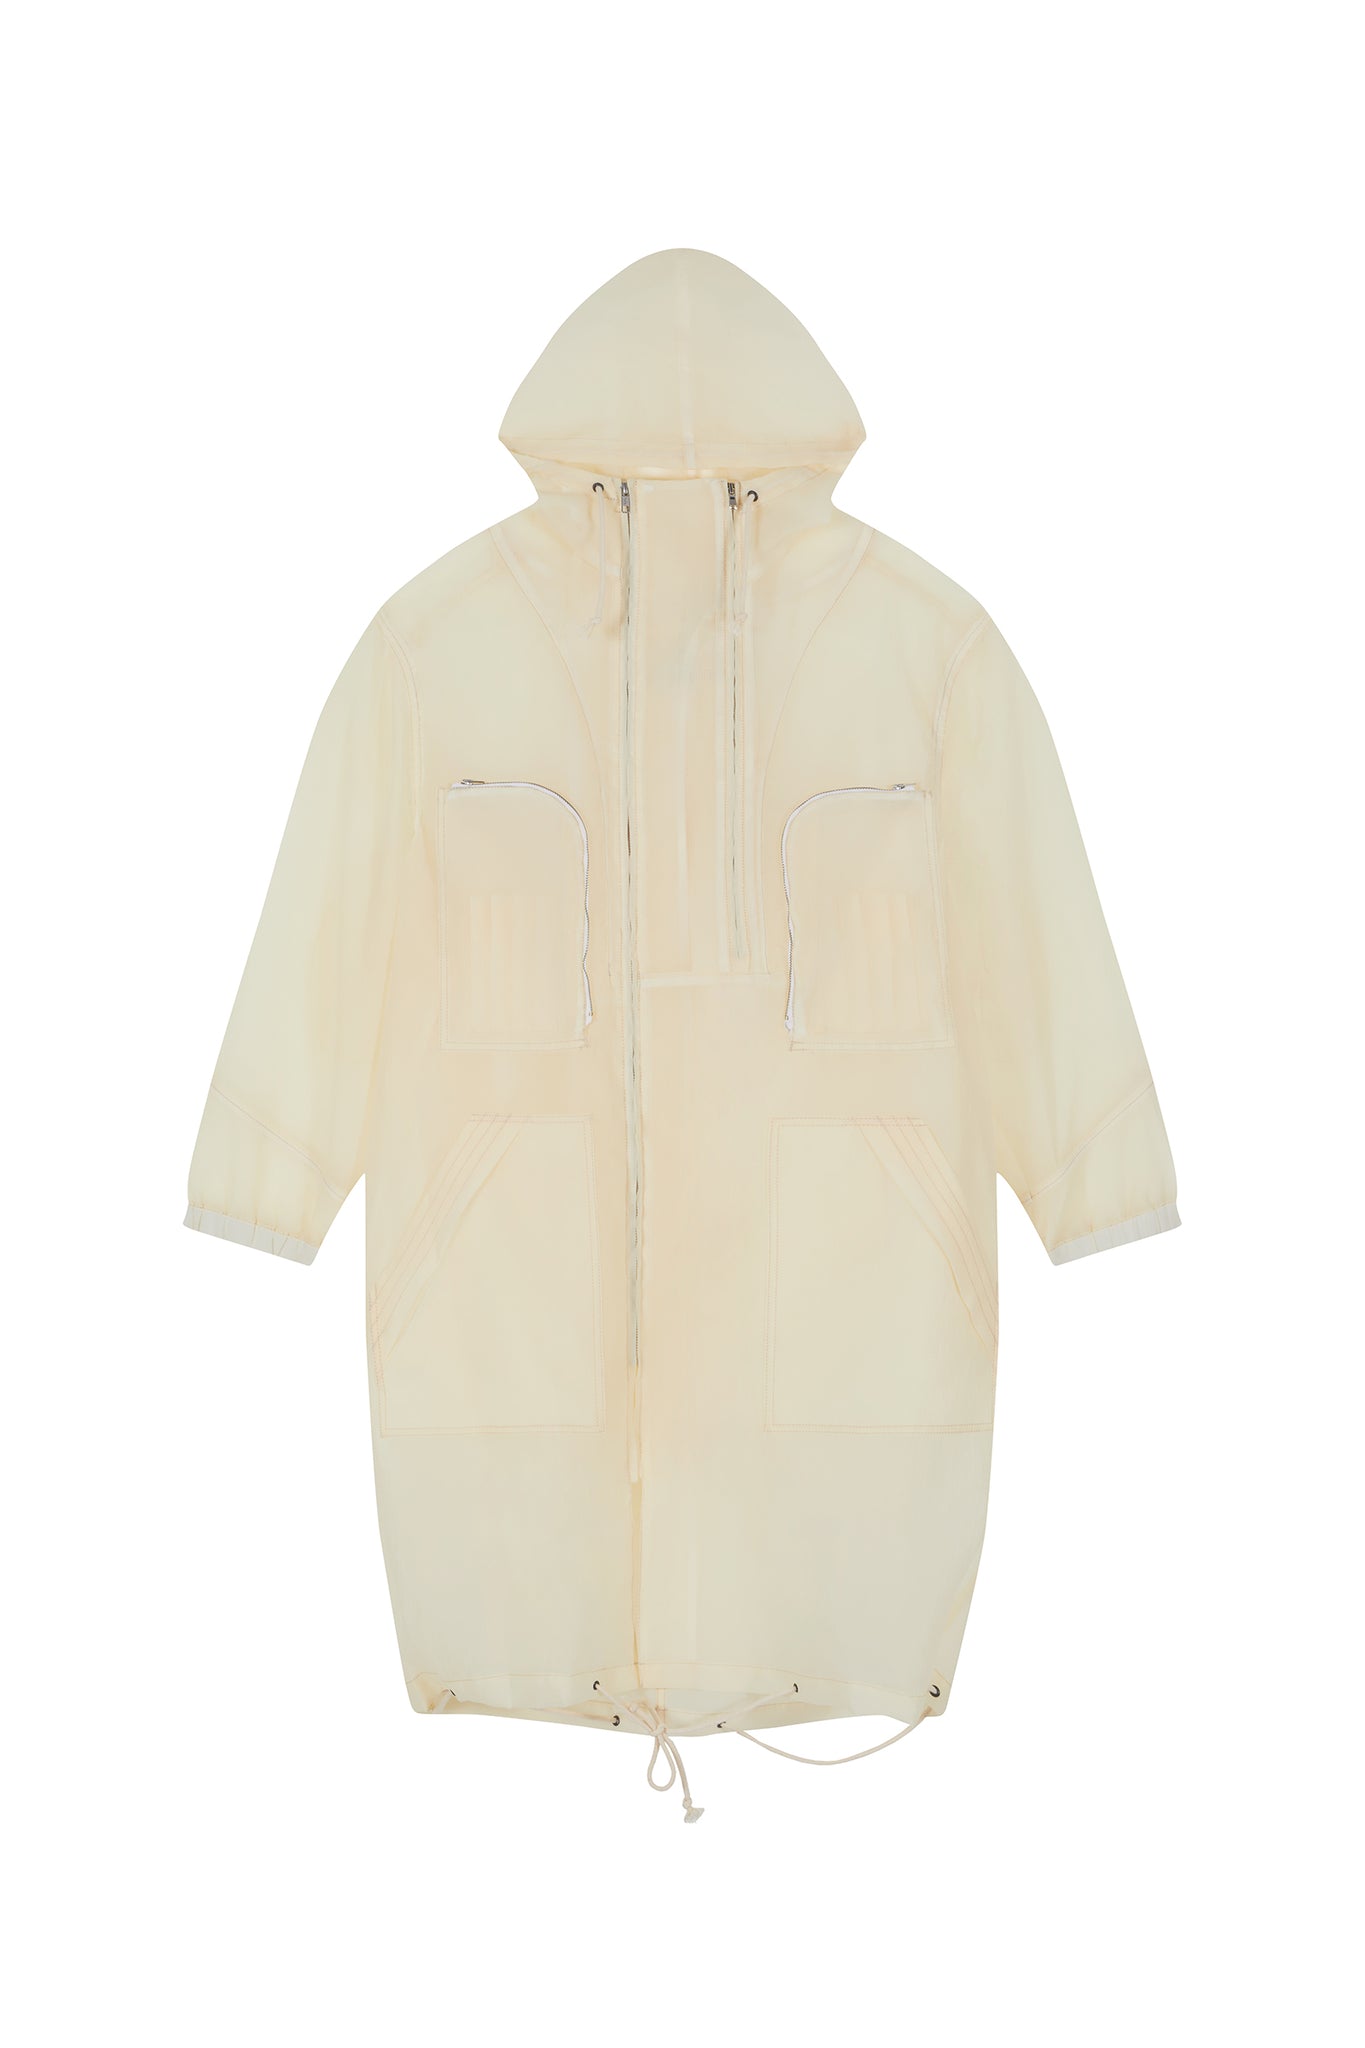 THE MOUNTAIN PARKA IN  OFF-WHITE